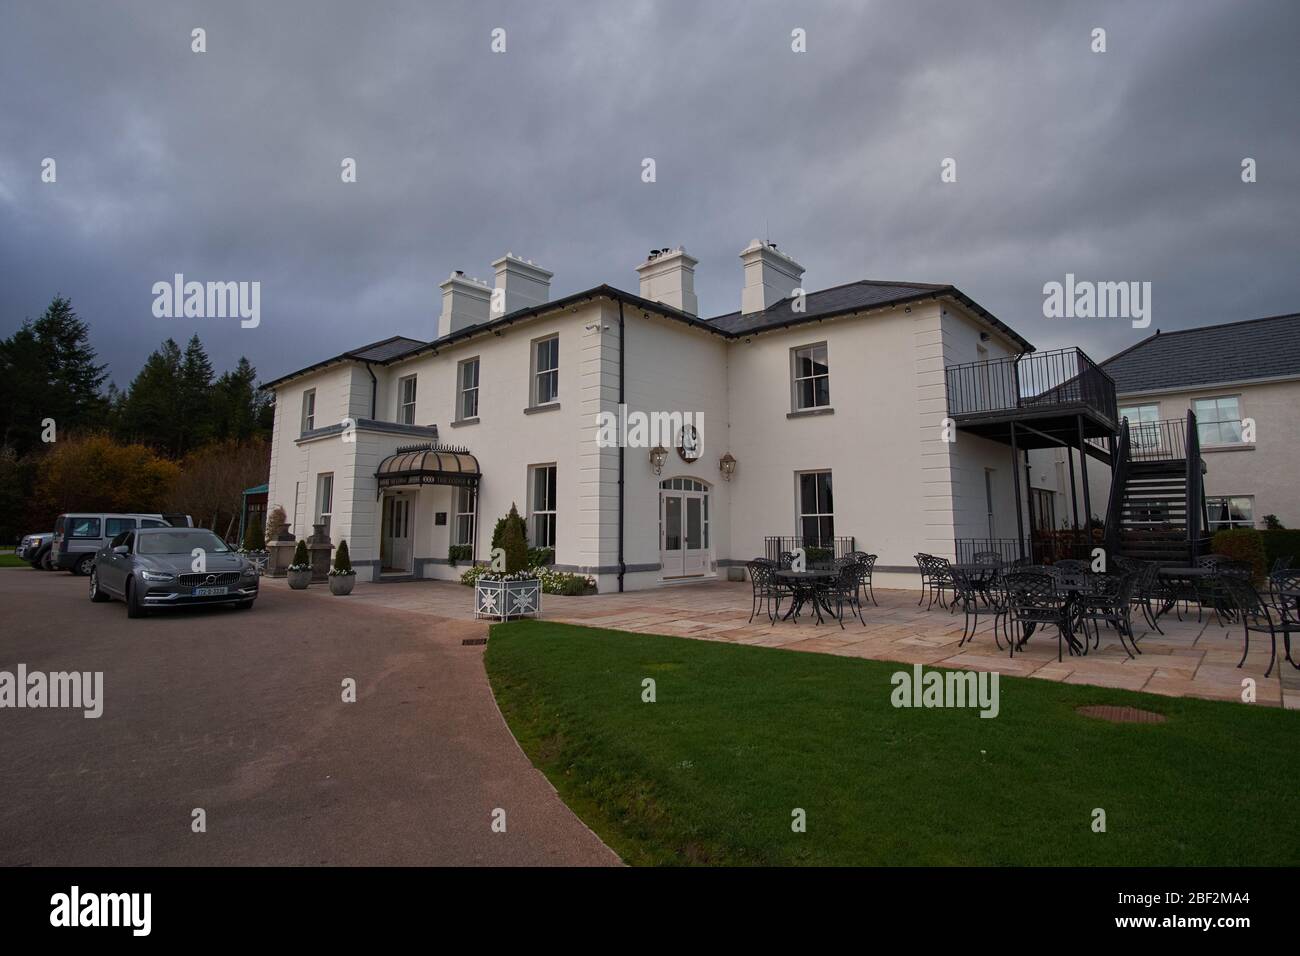 The Lodge restaurant and Inn in Cong, County Mayo Ireland Stock Photo